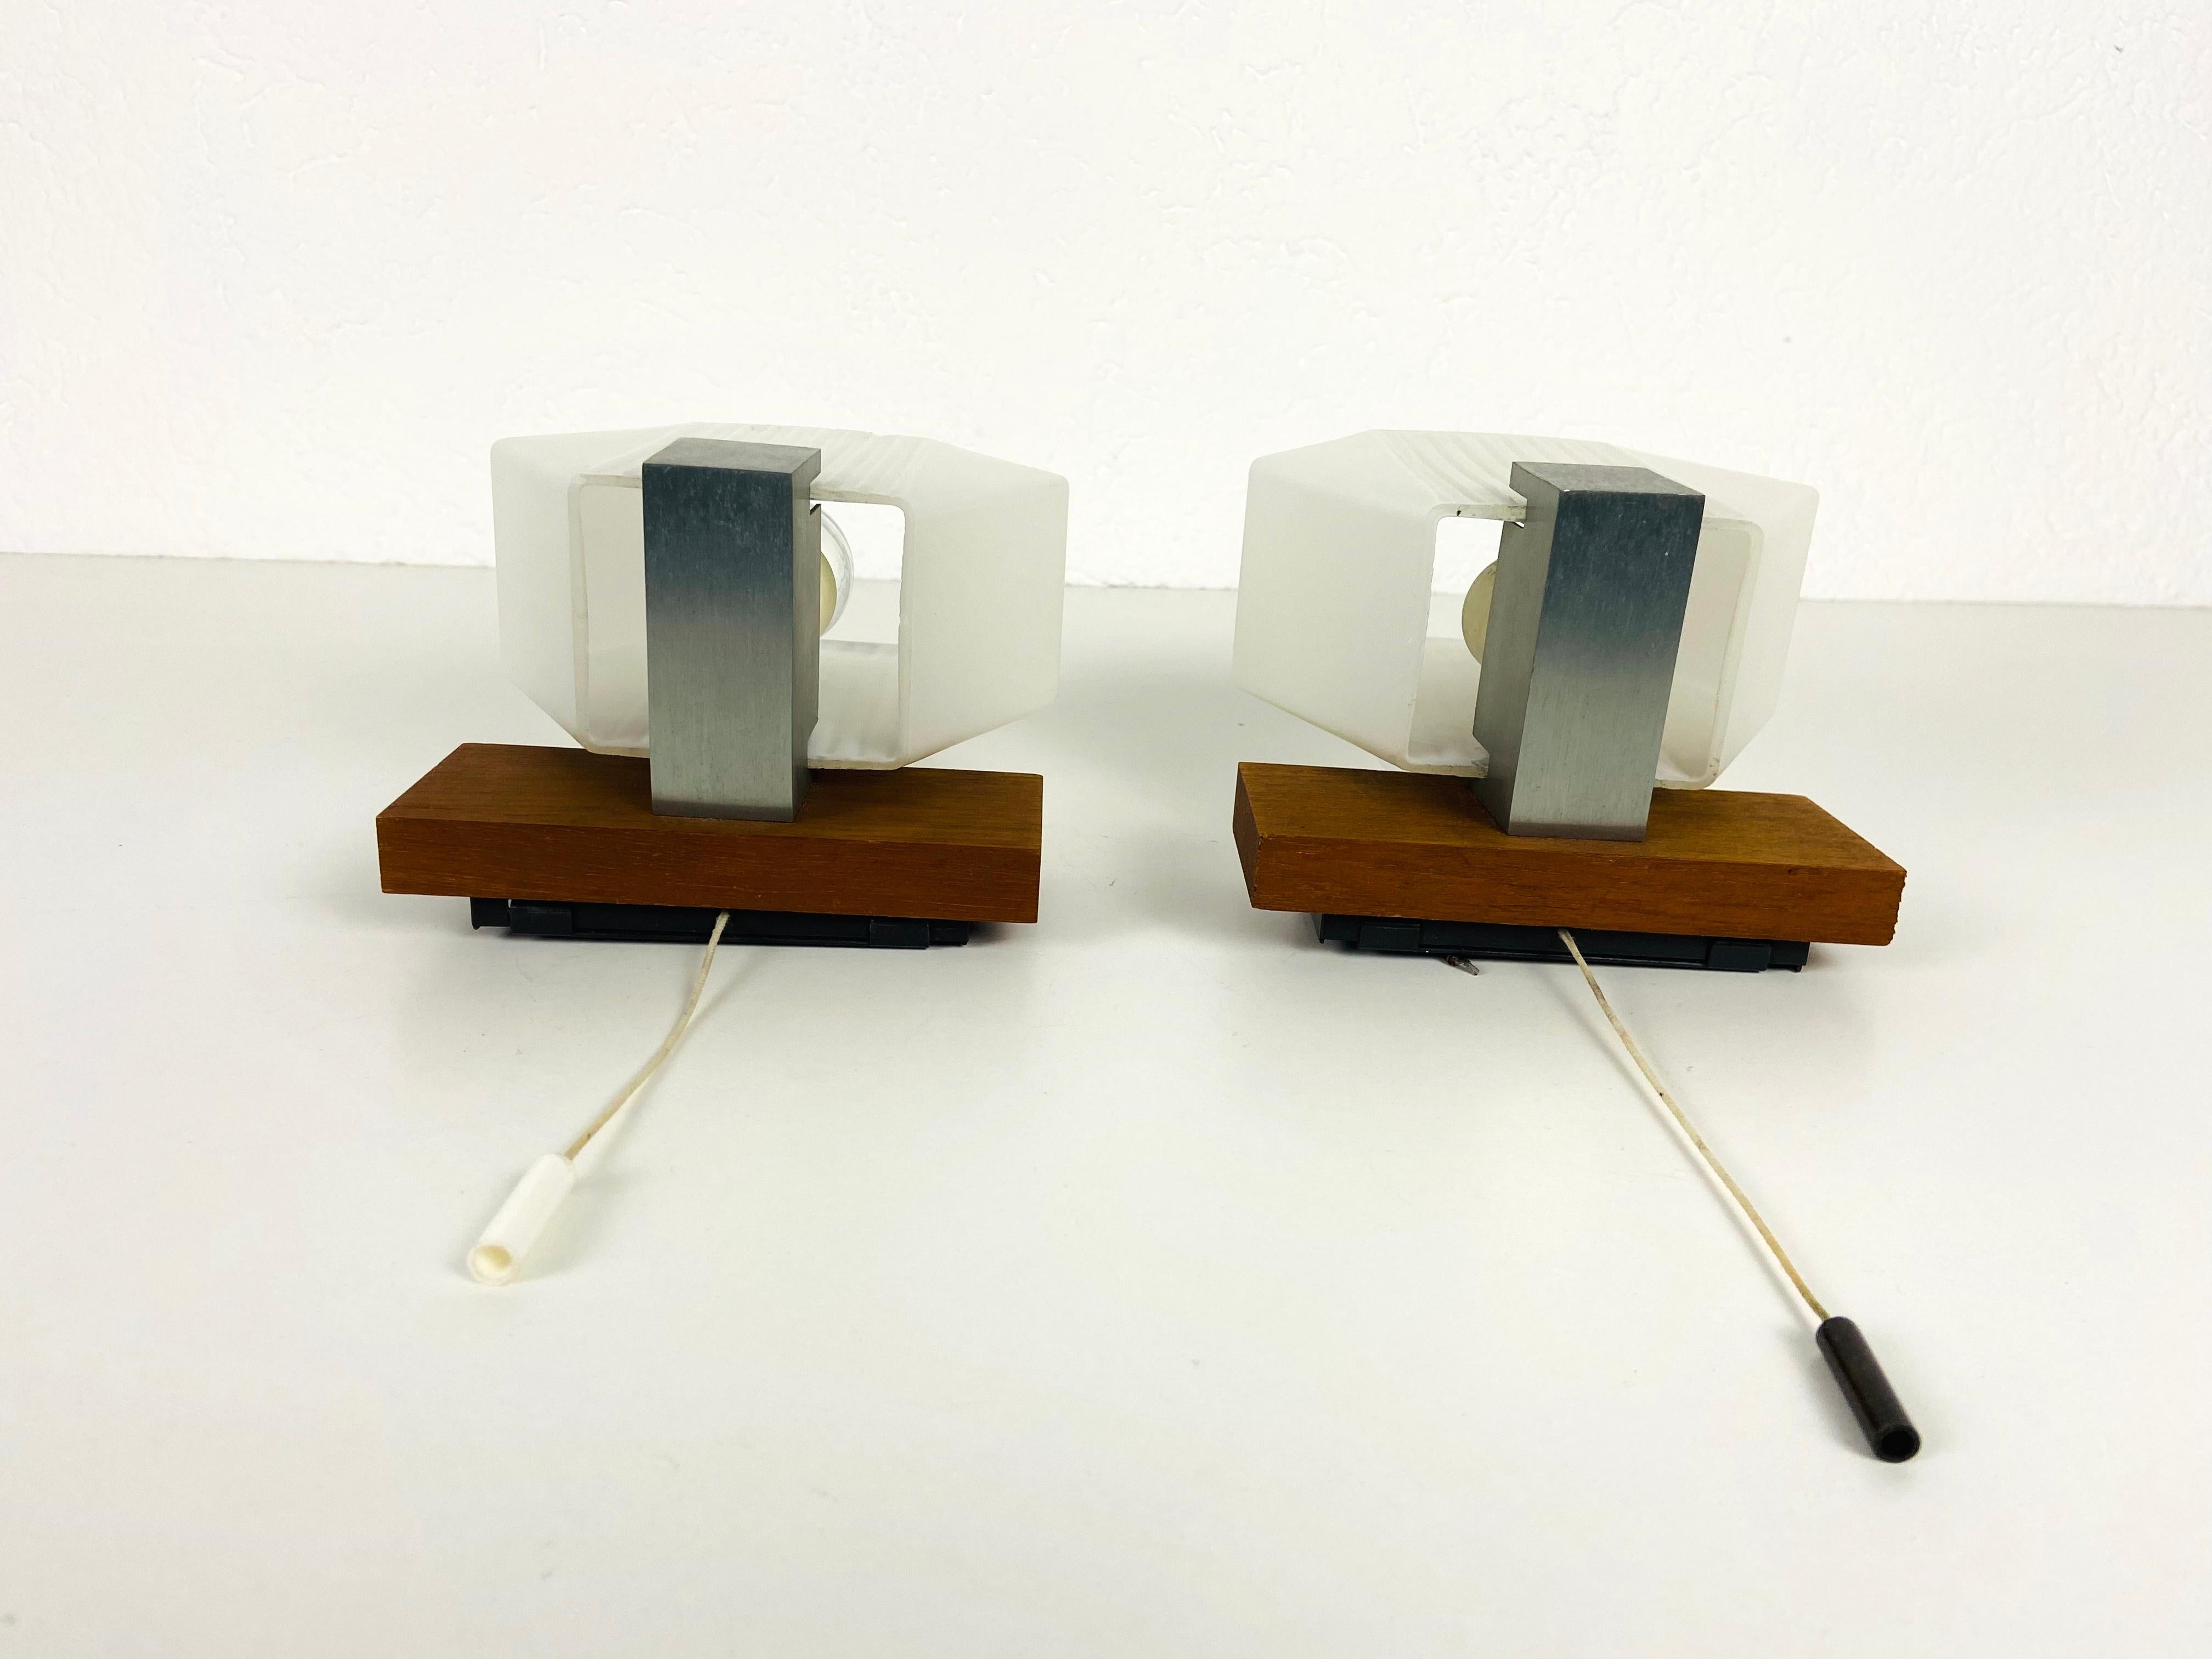 Pair of White Opal Glass and Teak Wall Lamps, 1970s, Germany For Sale 11